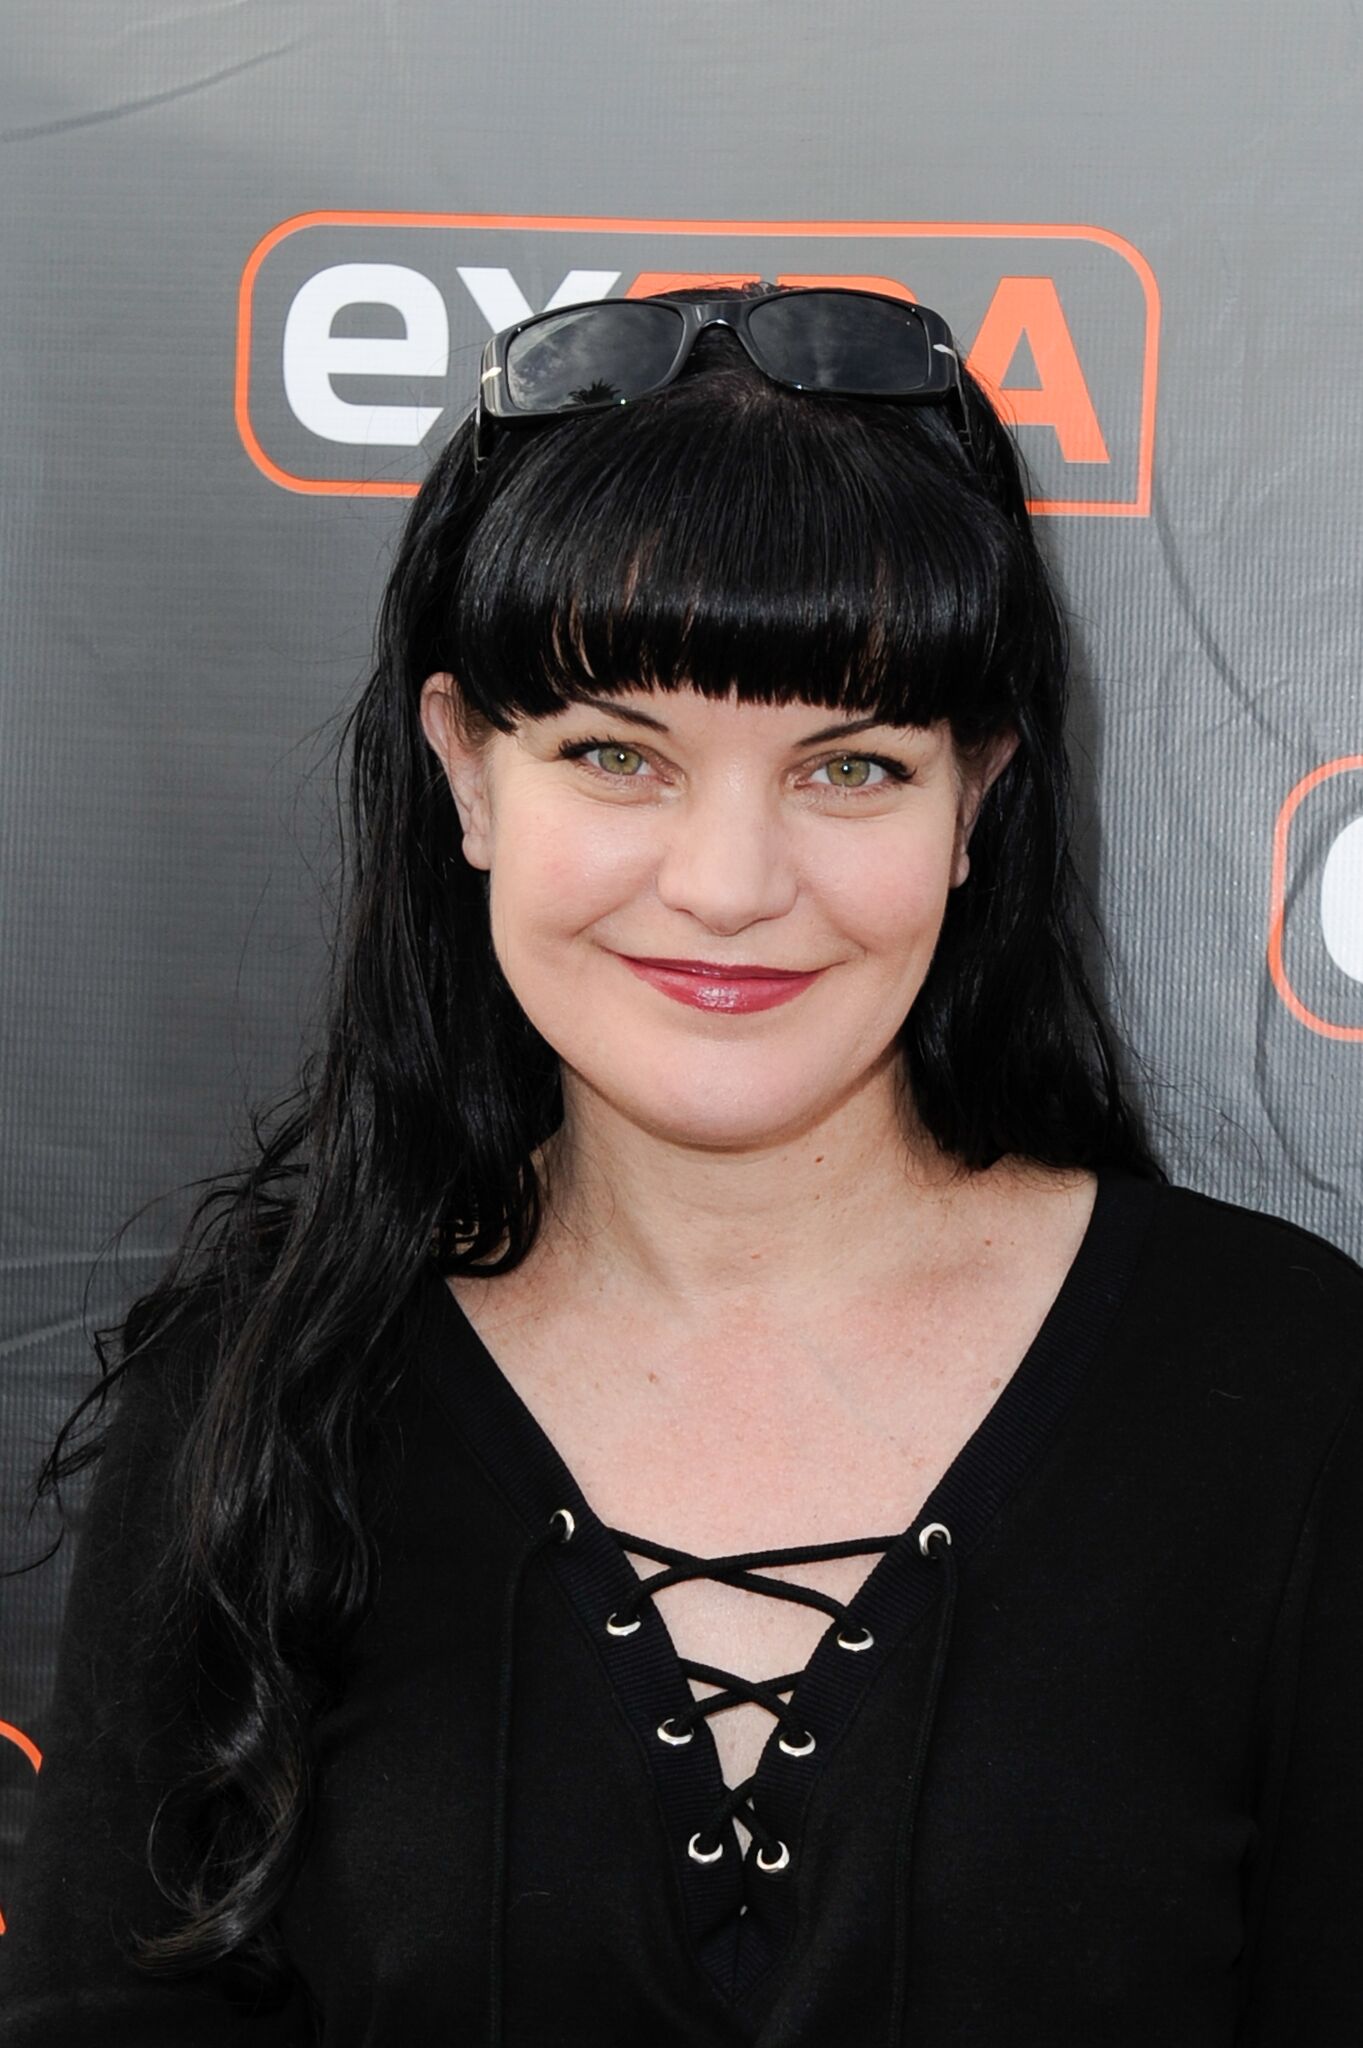 Pauley Perrette visite "Extra" aux Universal Studios Hollywood |  Getty Images